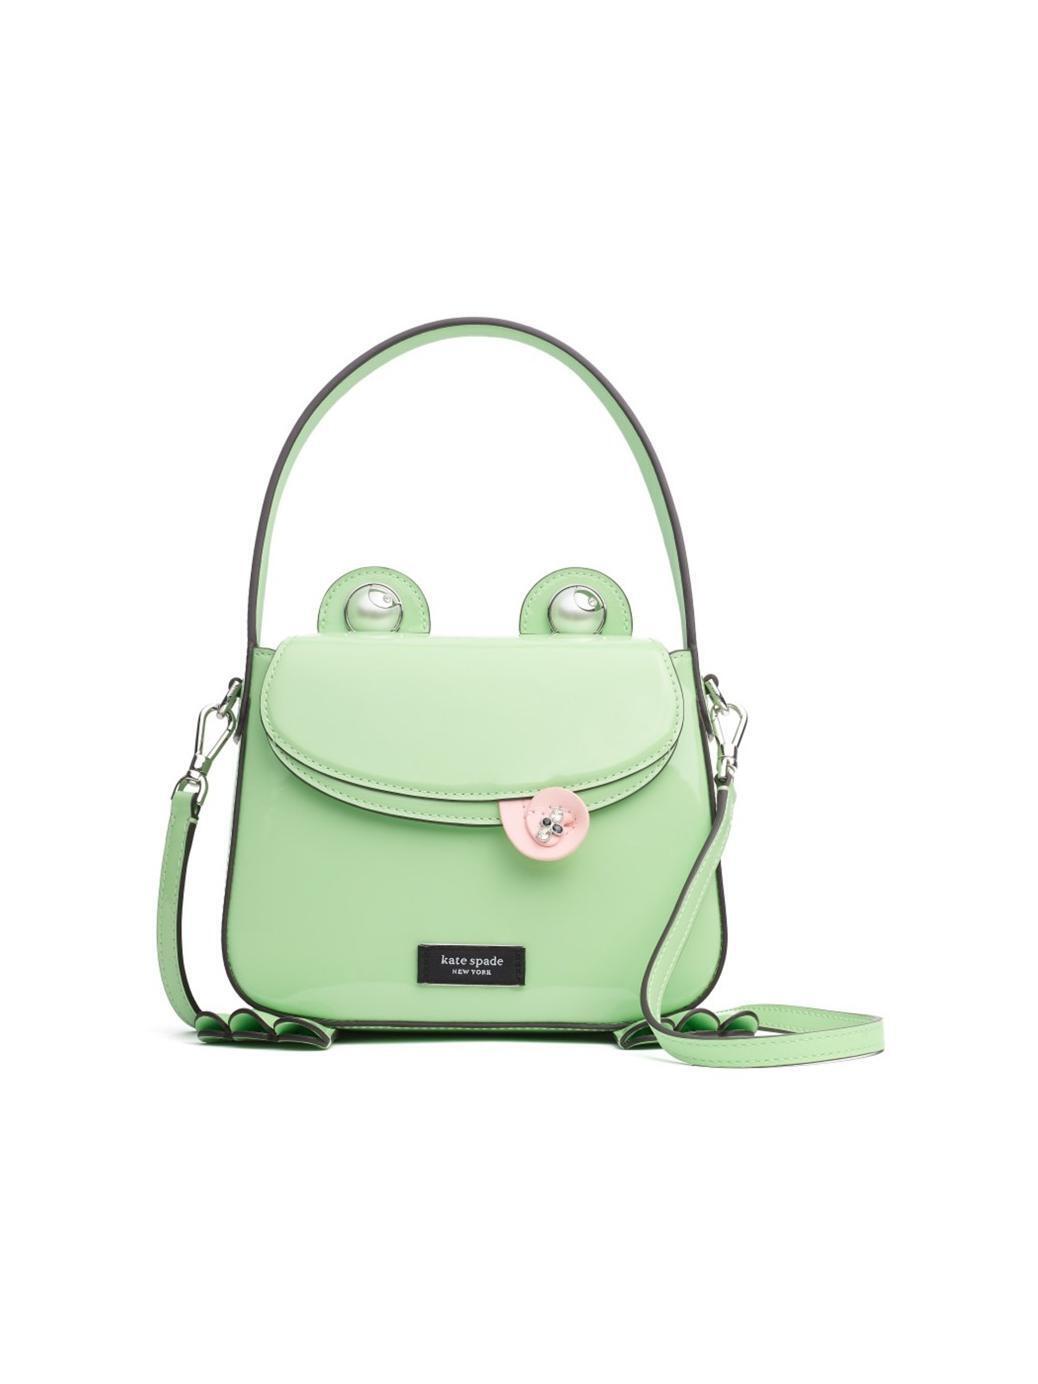 LILY PATENT LEATHER 3d frog hobo
73,700円